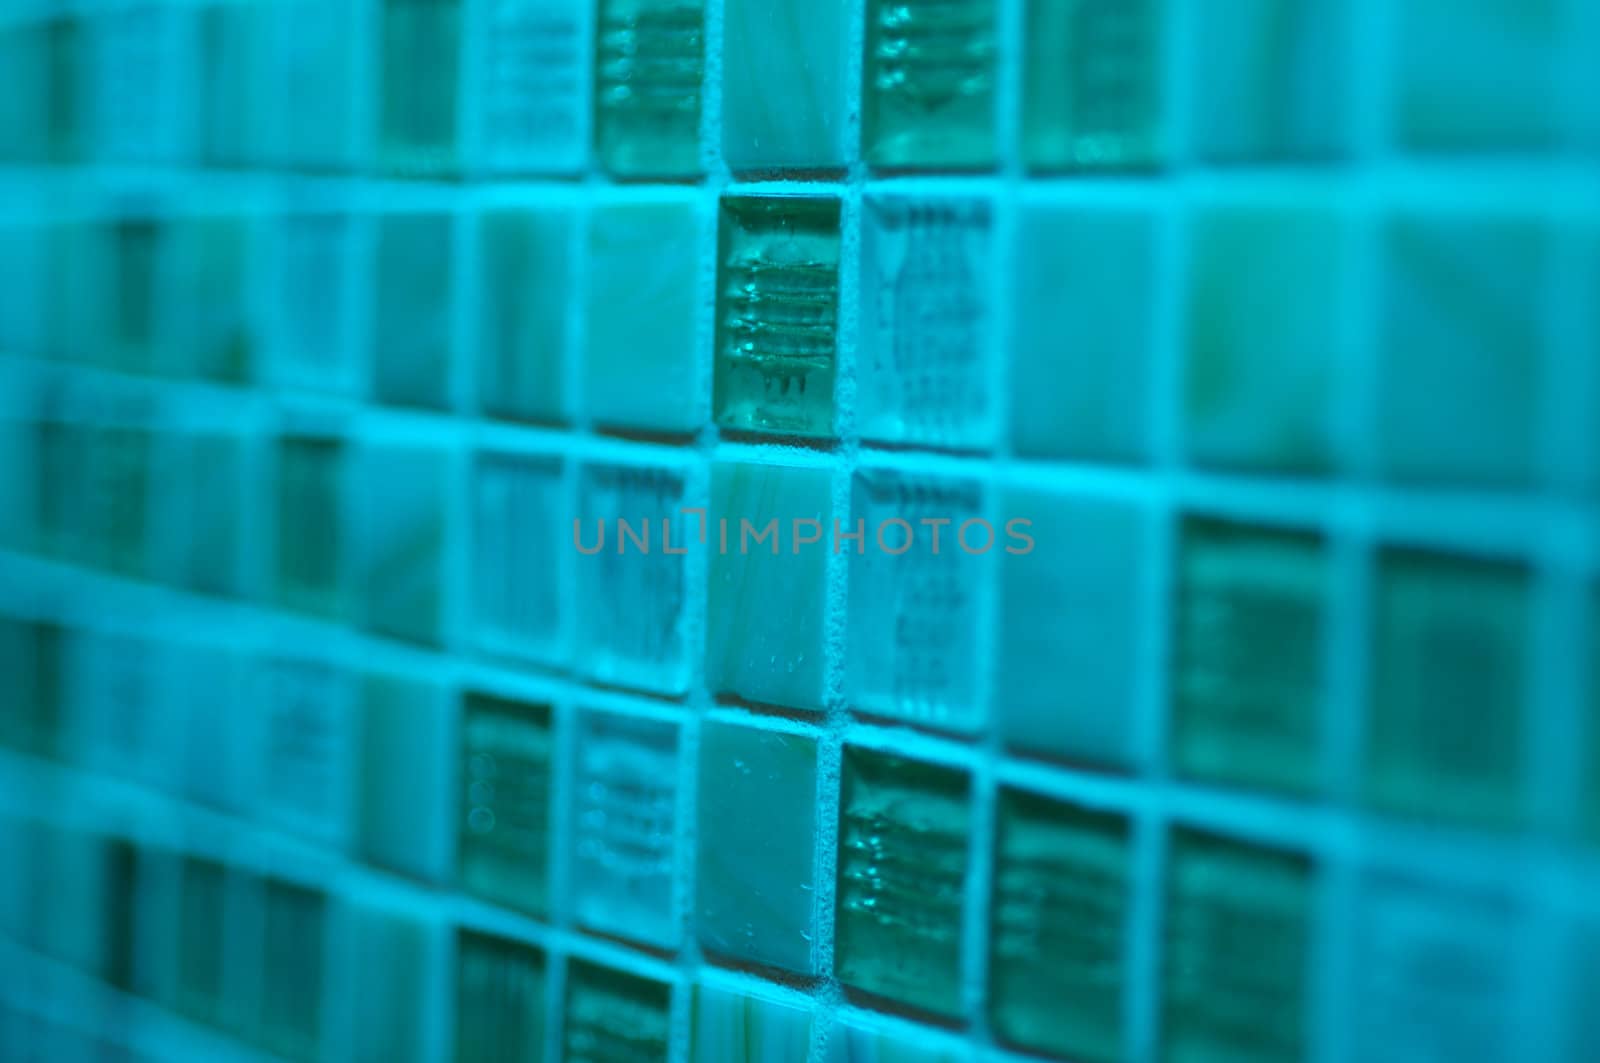 Abstract square background in teal